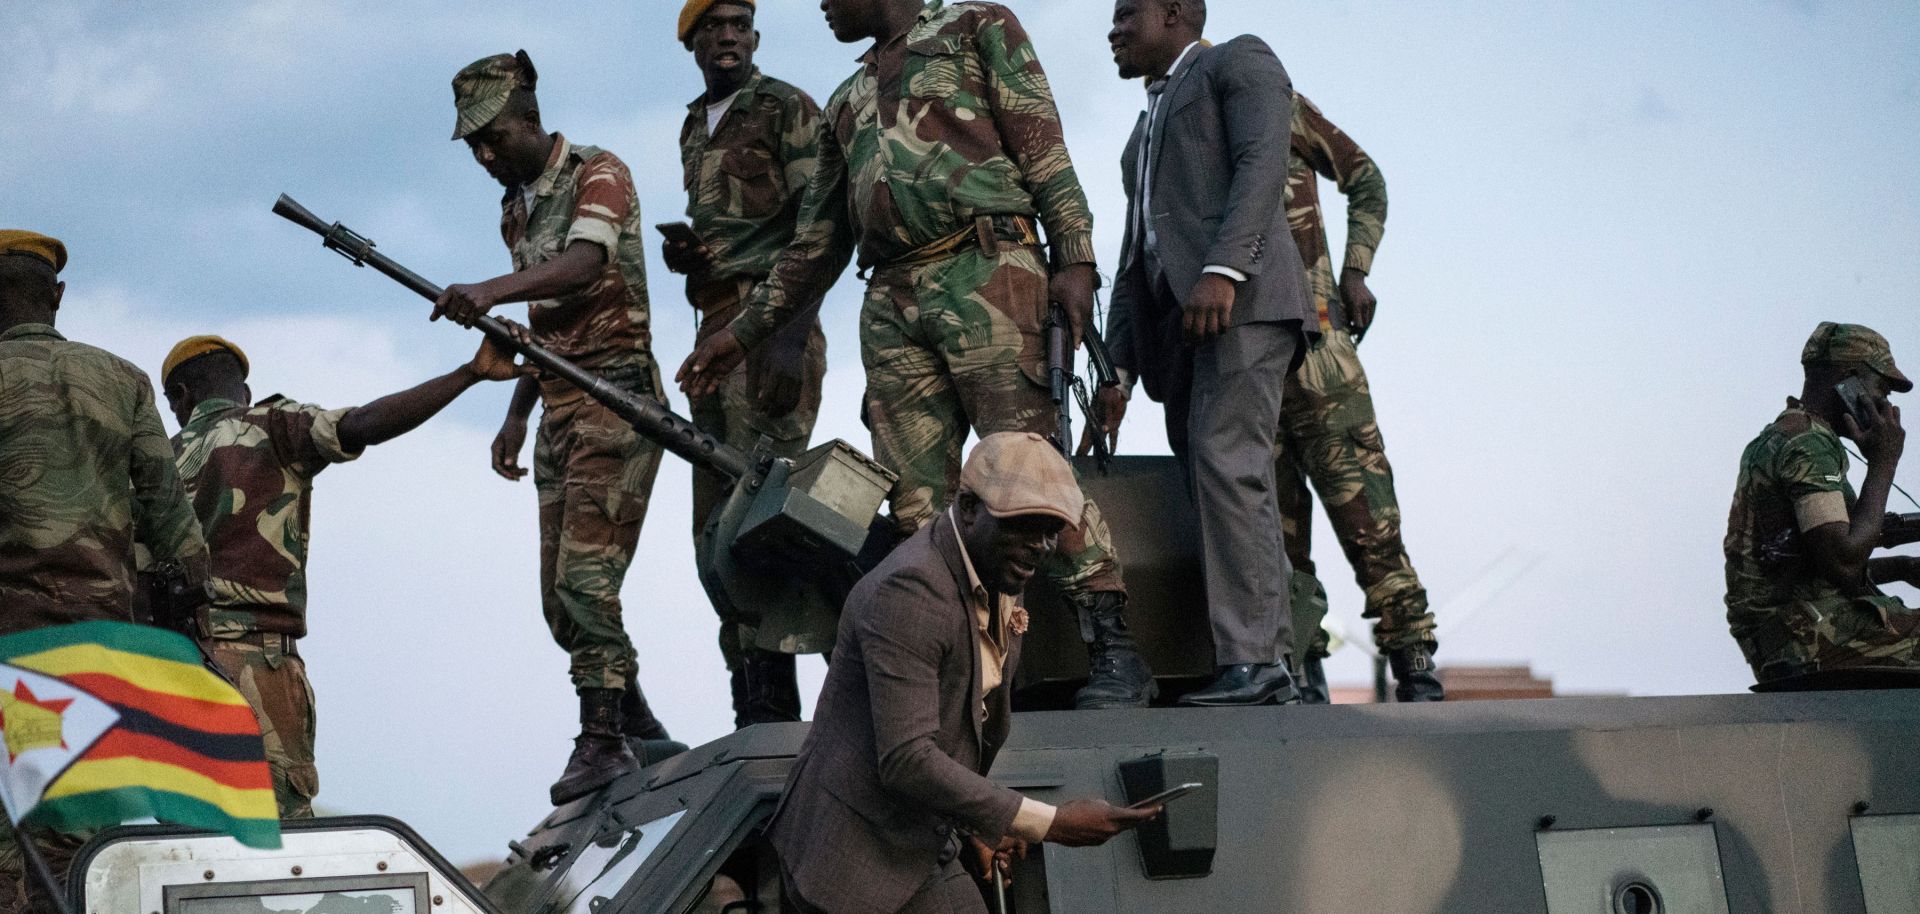 Residents of Harare, the capital of Zimbabwe, thank soldiers on the street after the resignation of President Robert Mugabe.